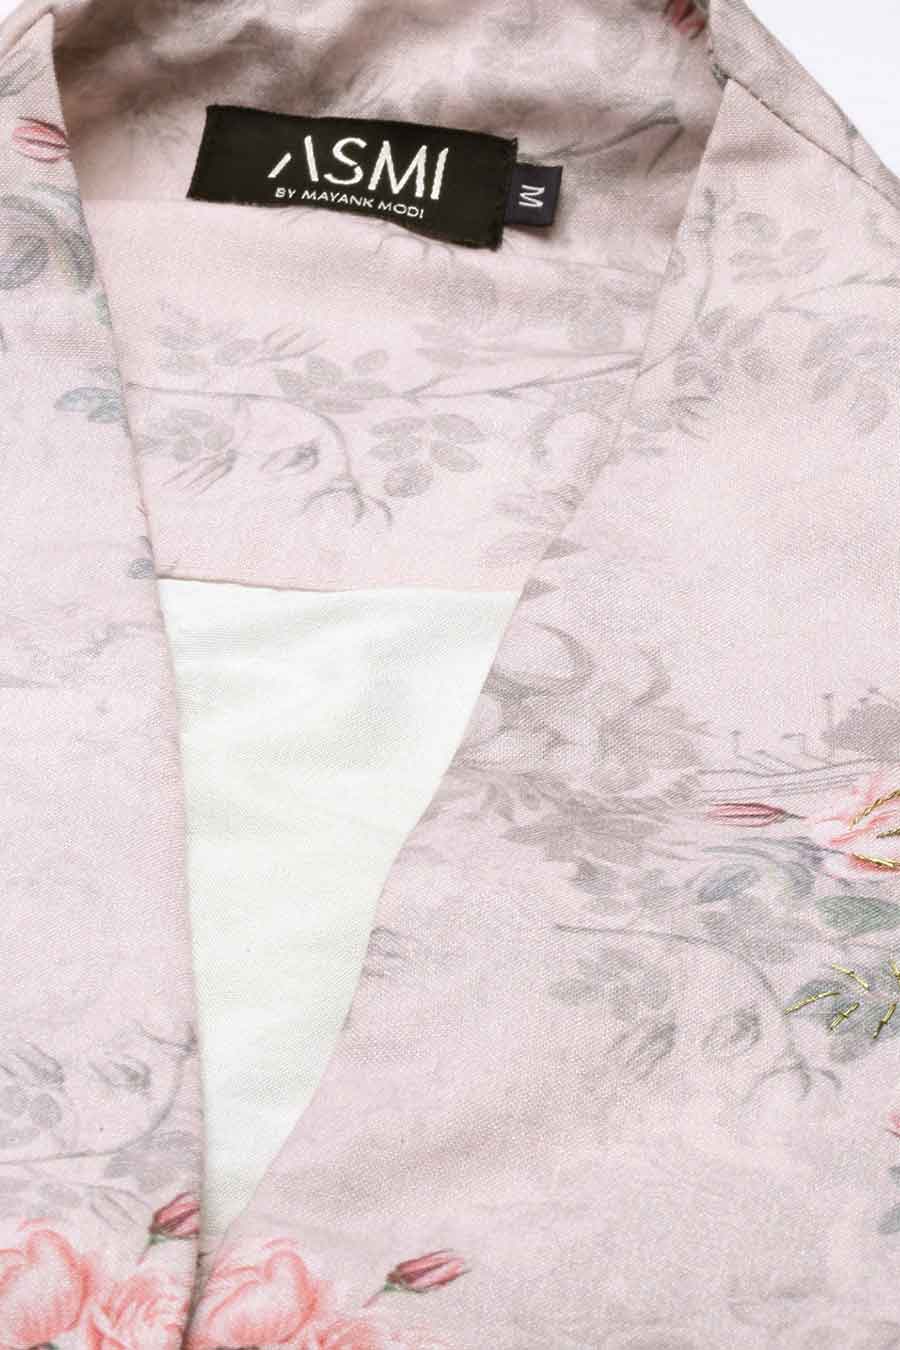 Pink Linen Embroidered Jacket